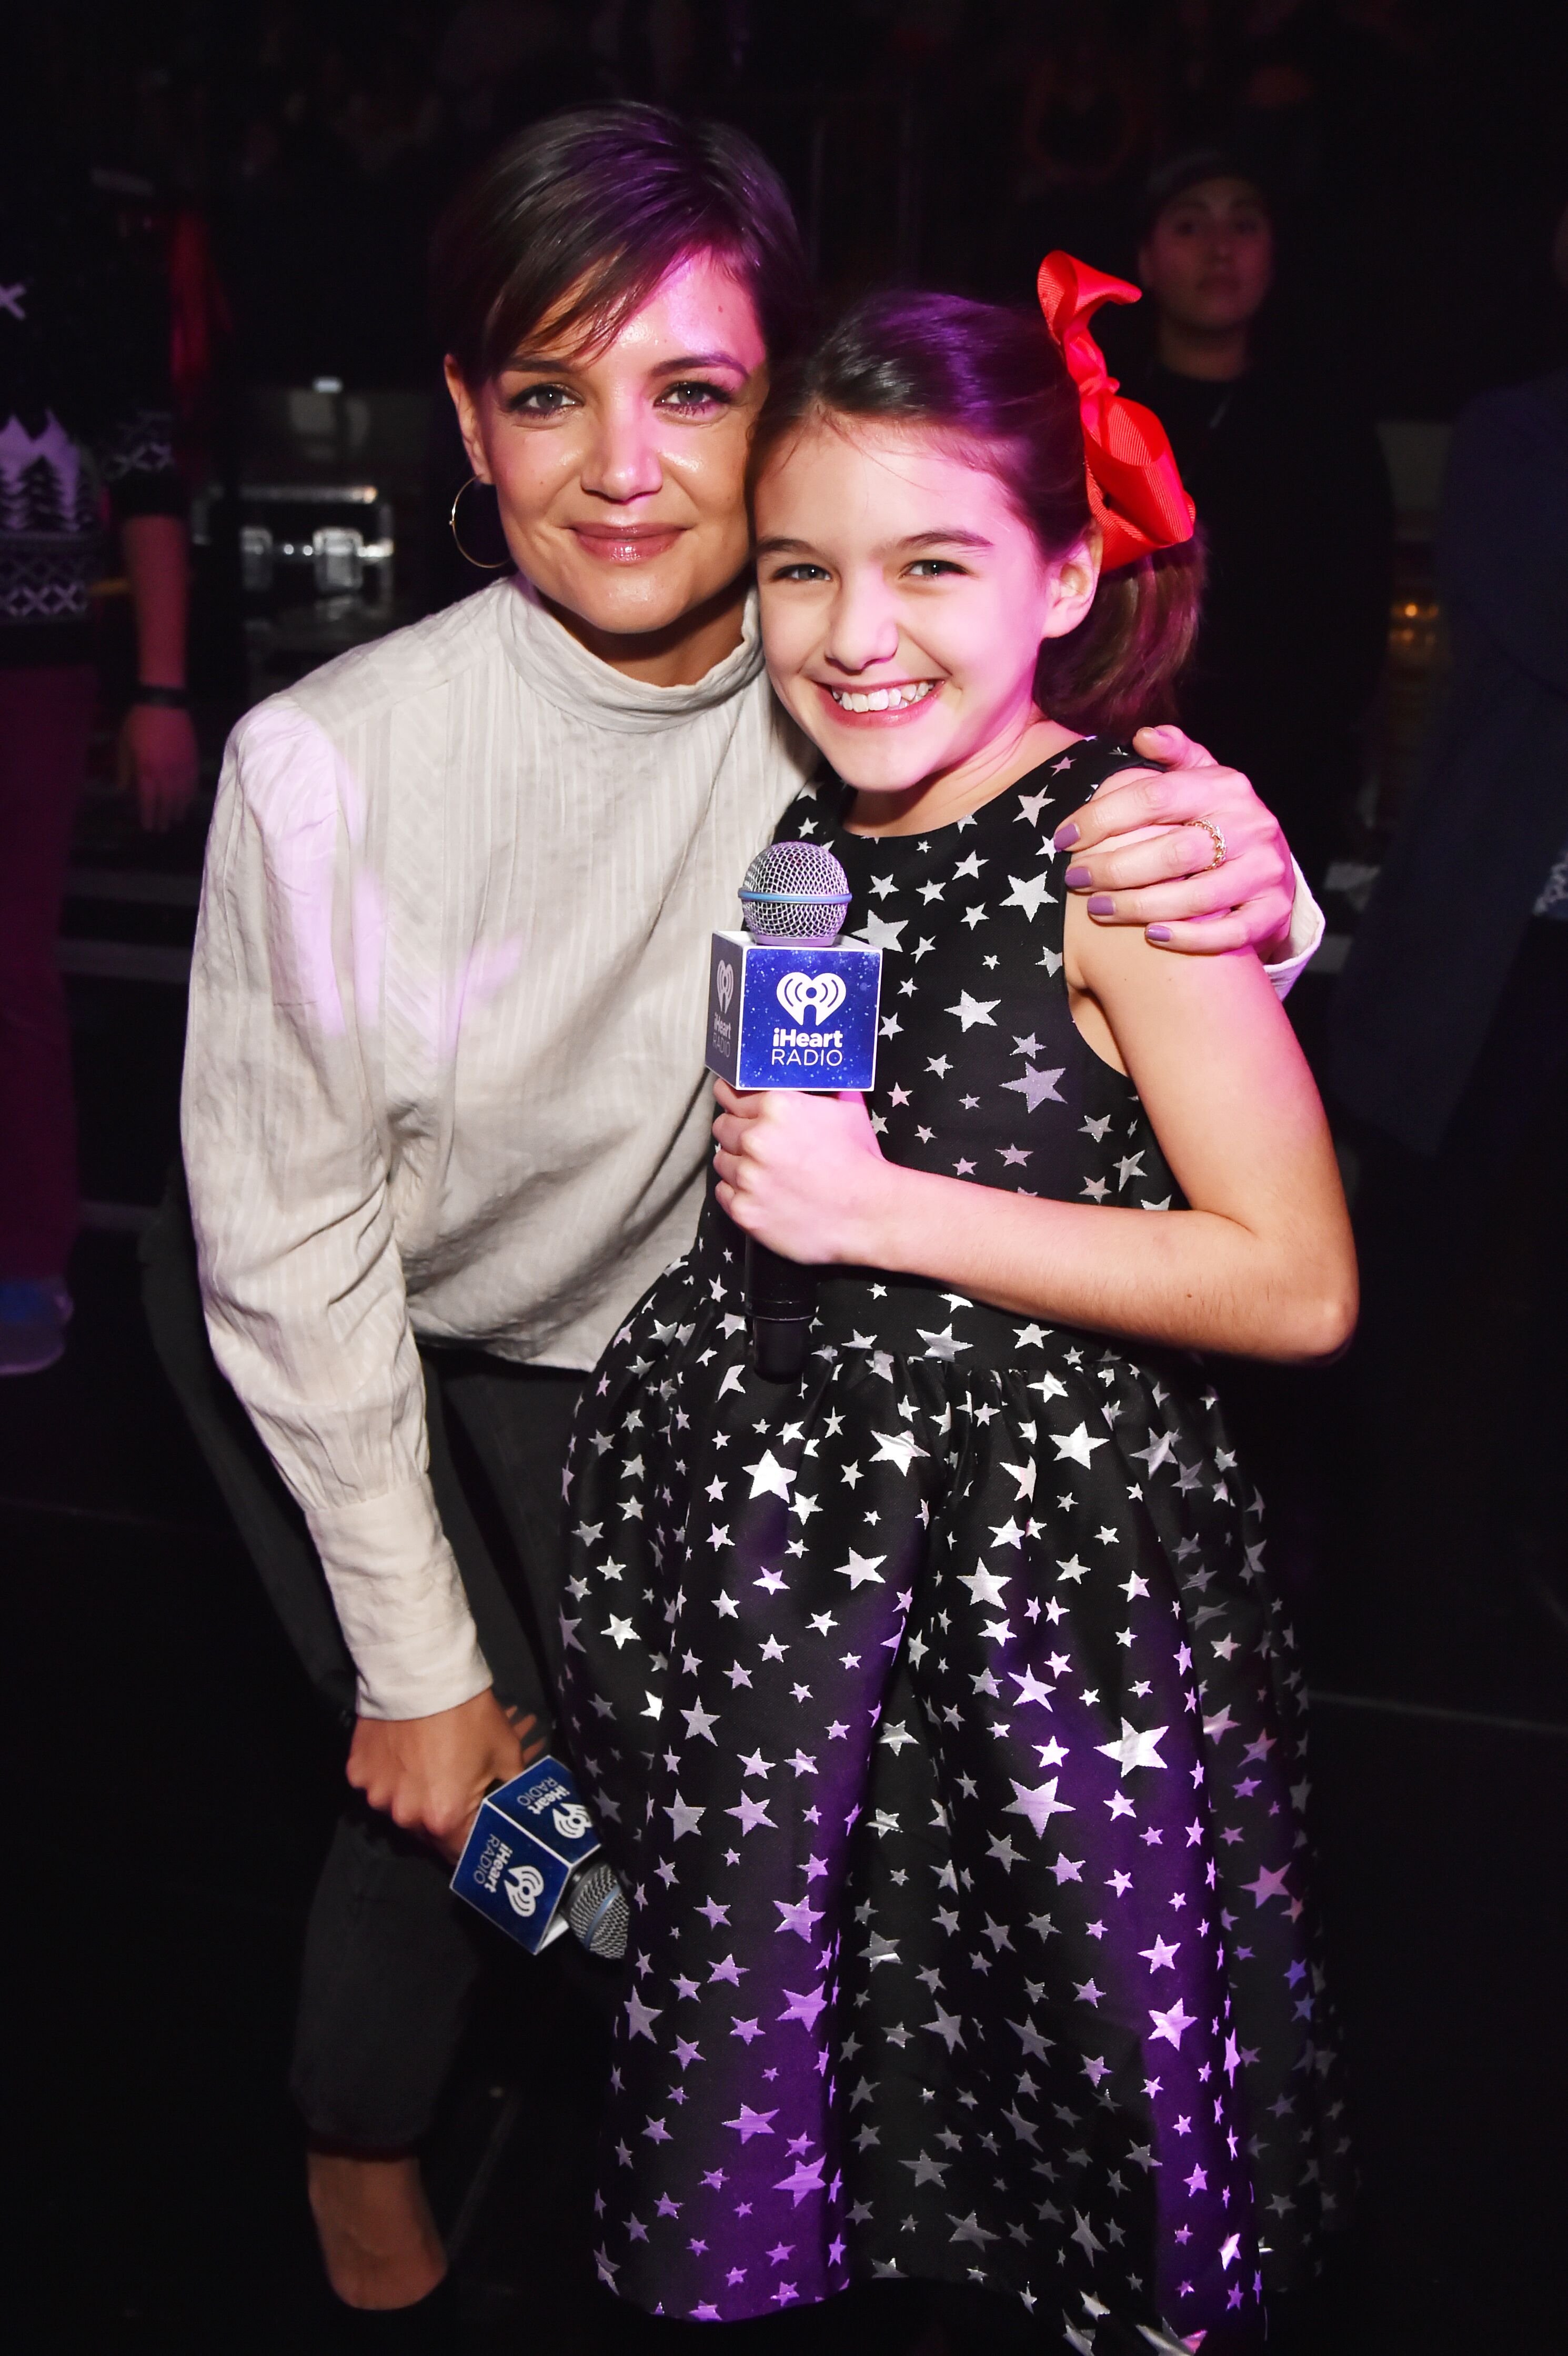 Katie Holmes and Suri Cruise attend the Z100's Jingle Ball 2017 on December 8, 2017 in New York City | Photo: Getty Images